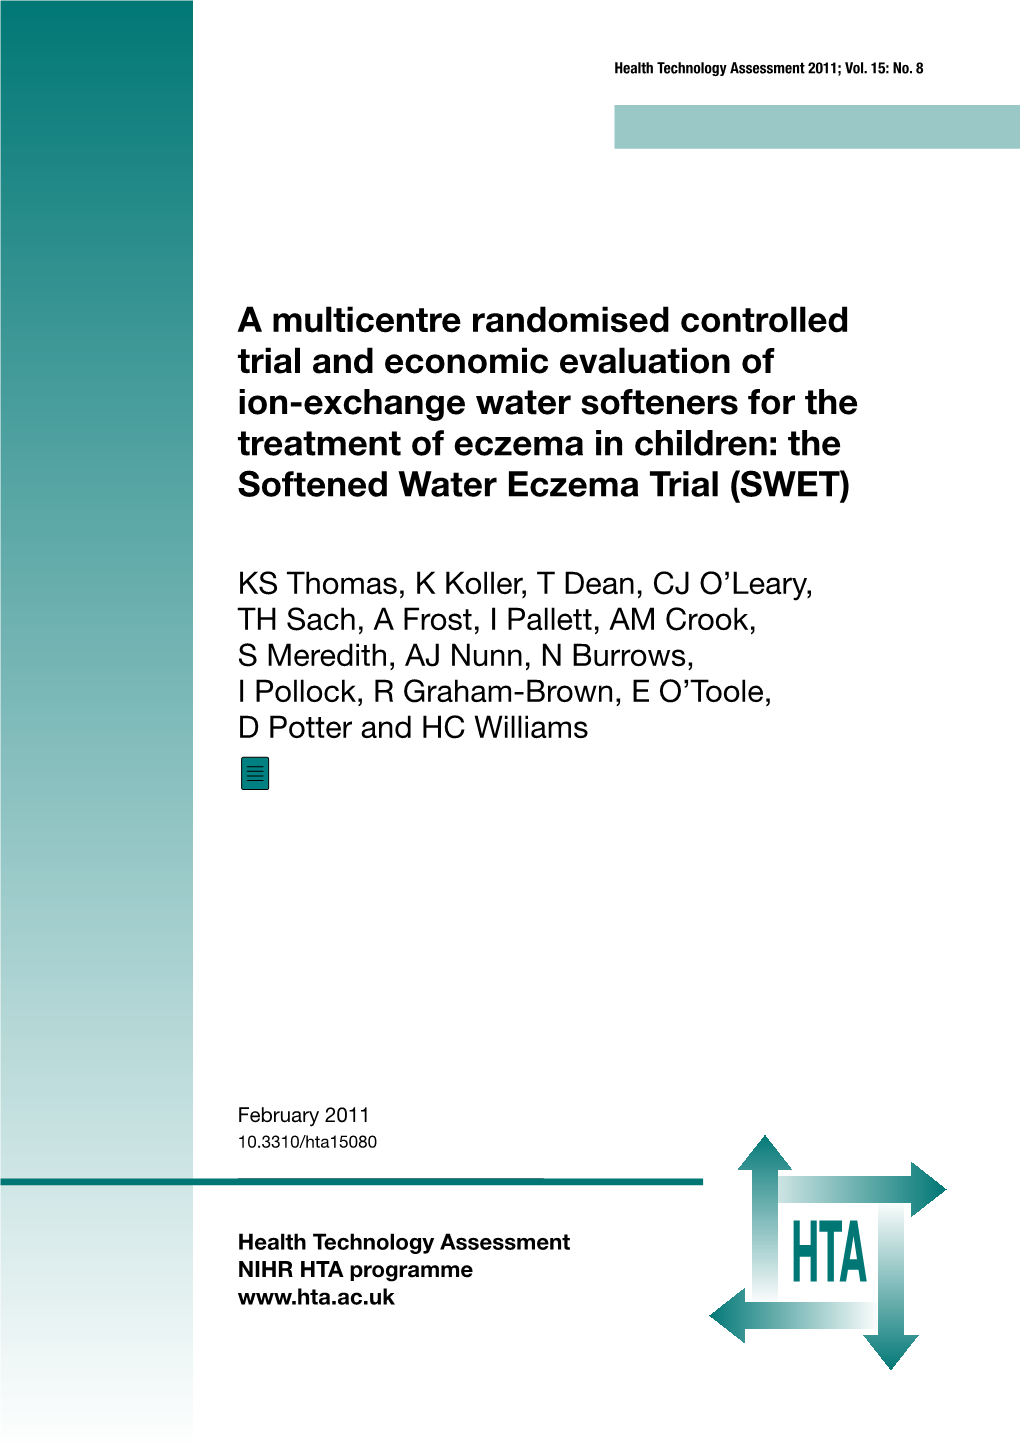 A Multicentre Randomised Controlled Trial and Economic Evaluation of Ion